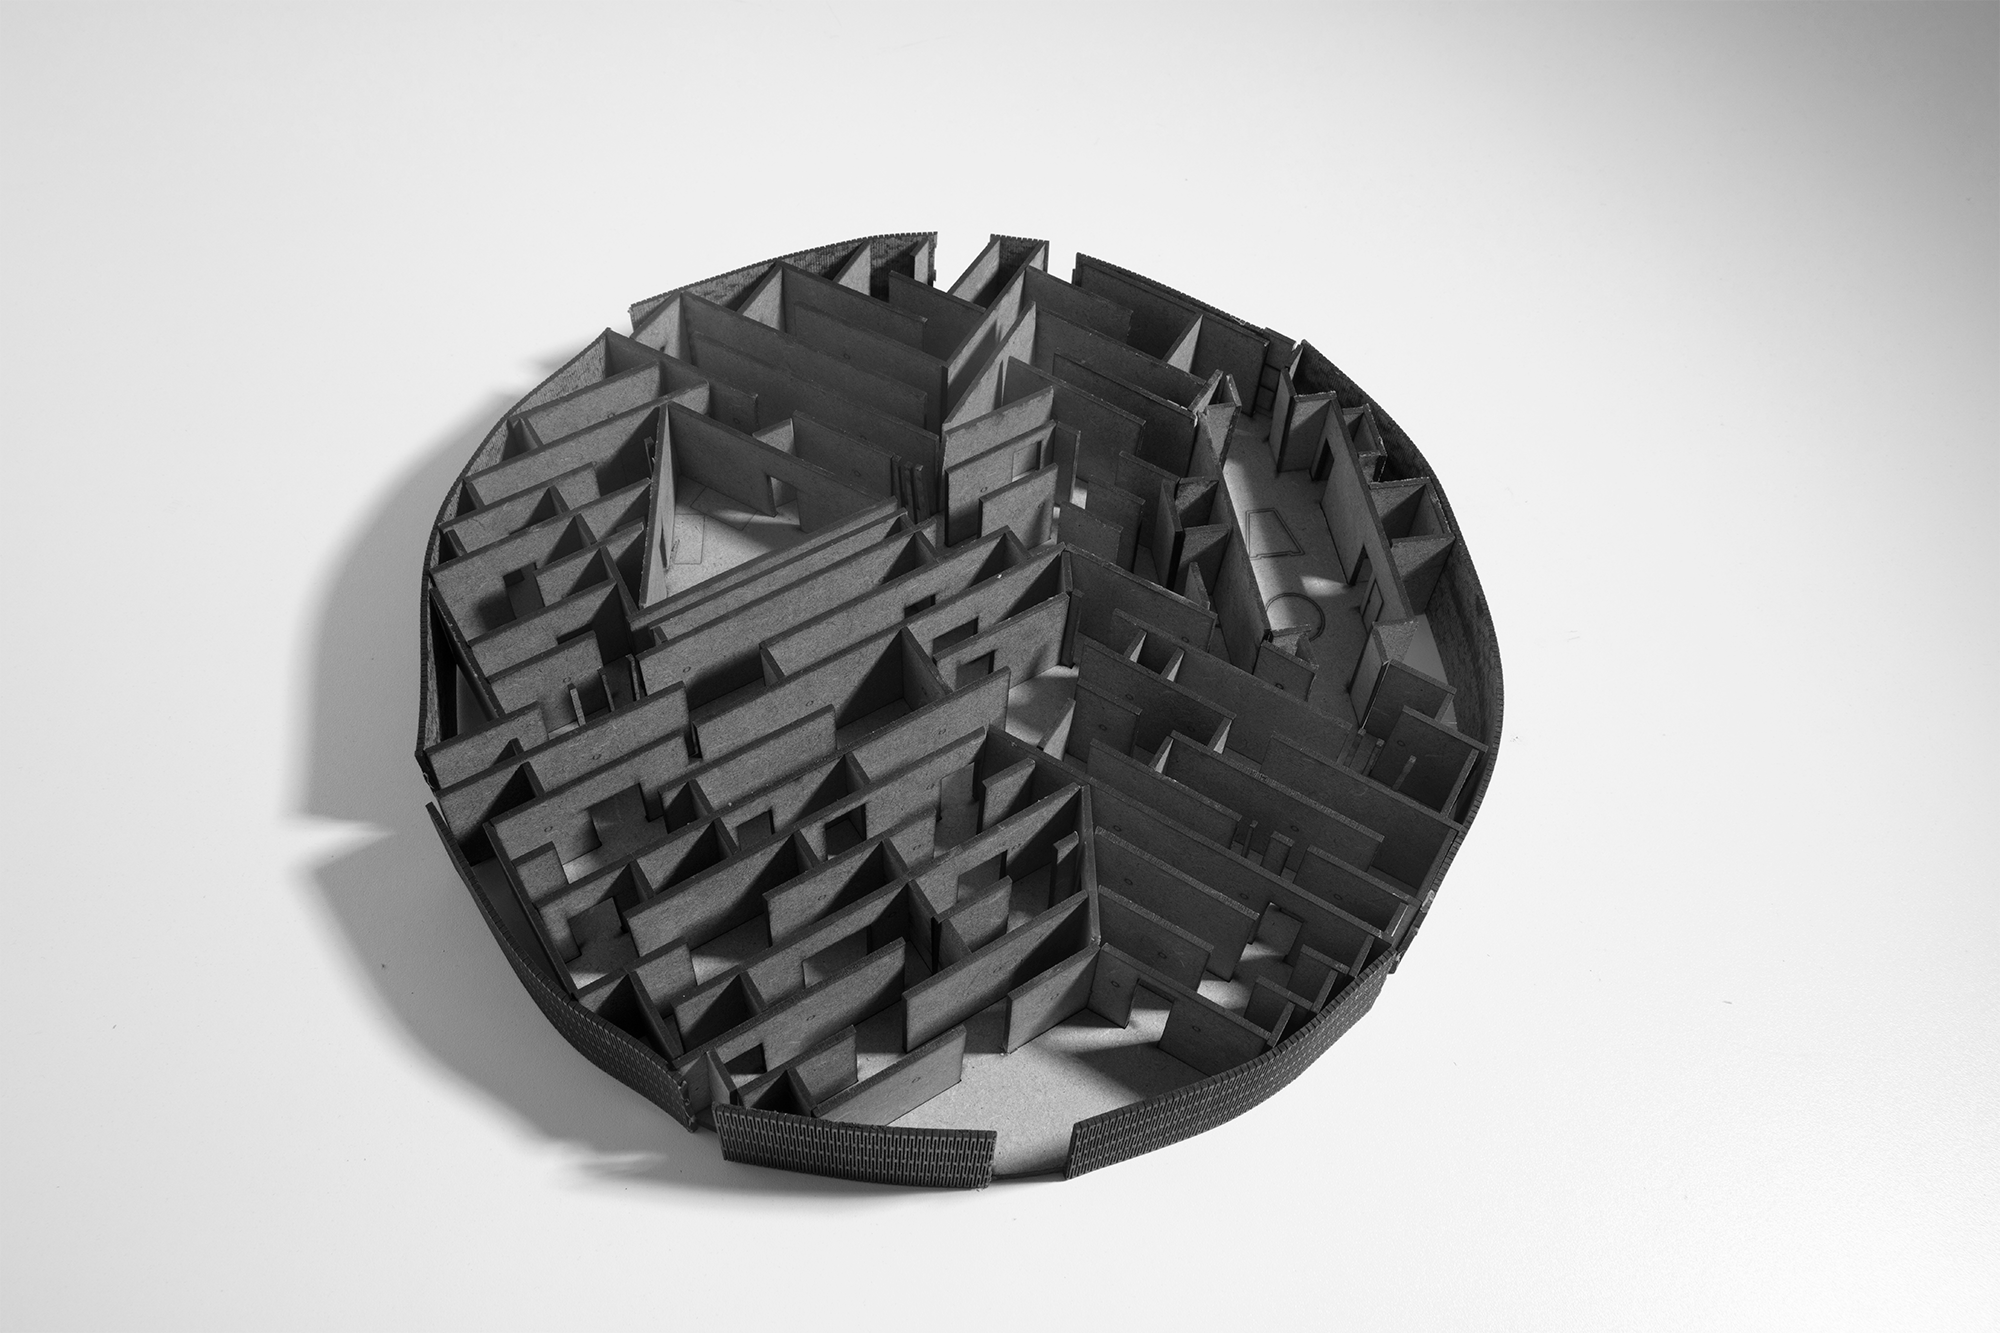 Physical 3D model of a maze made from MDF